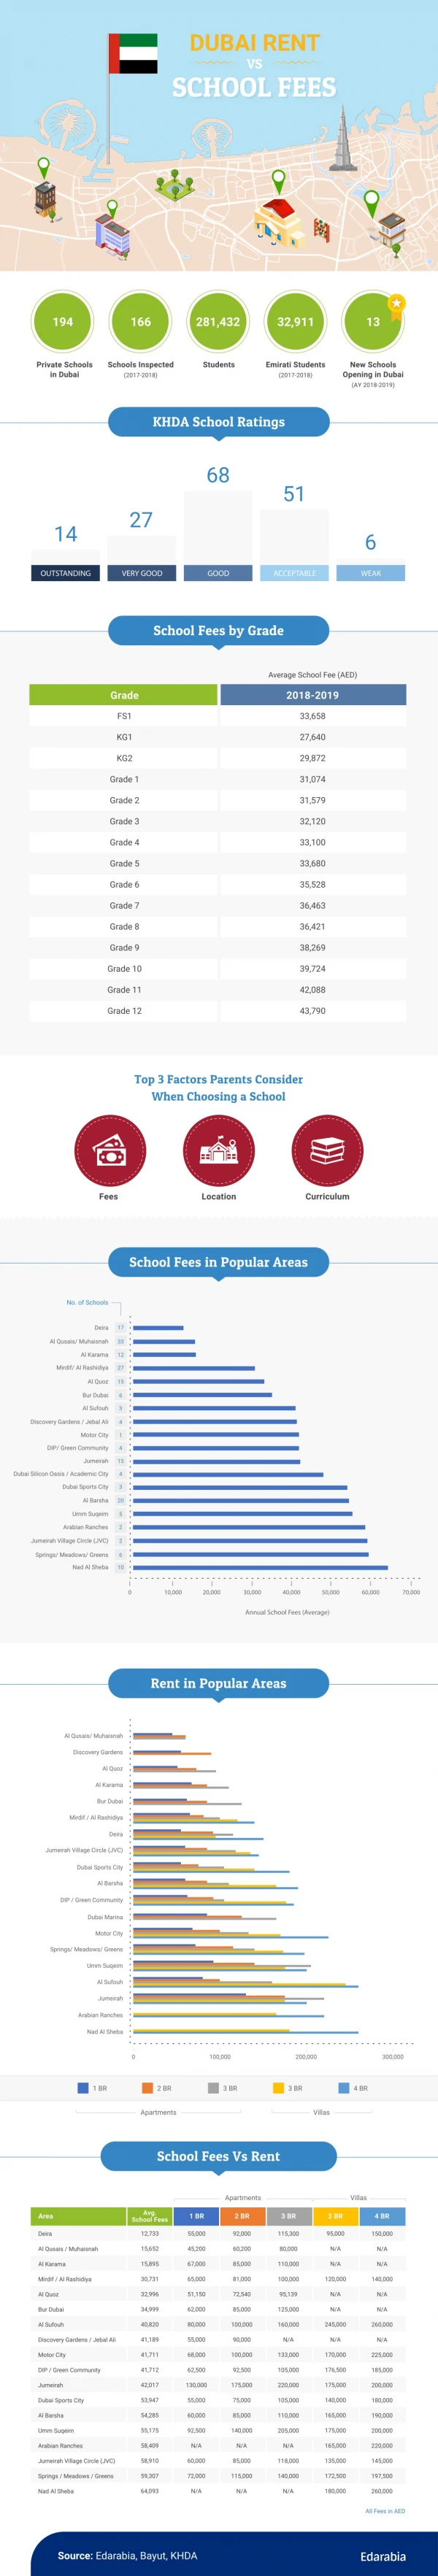 Dubai’s Most Affordable Areas for Education & Rent (2019)